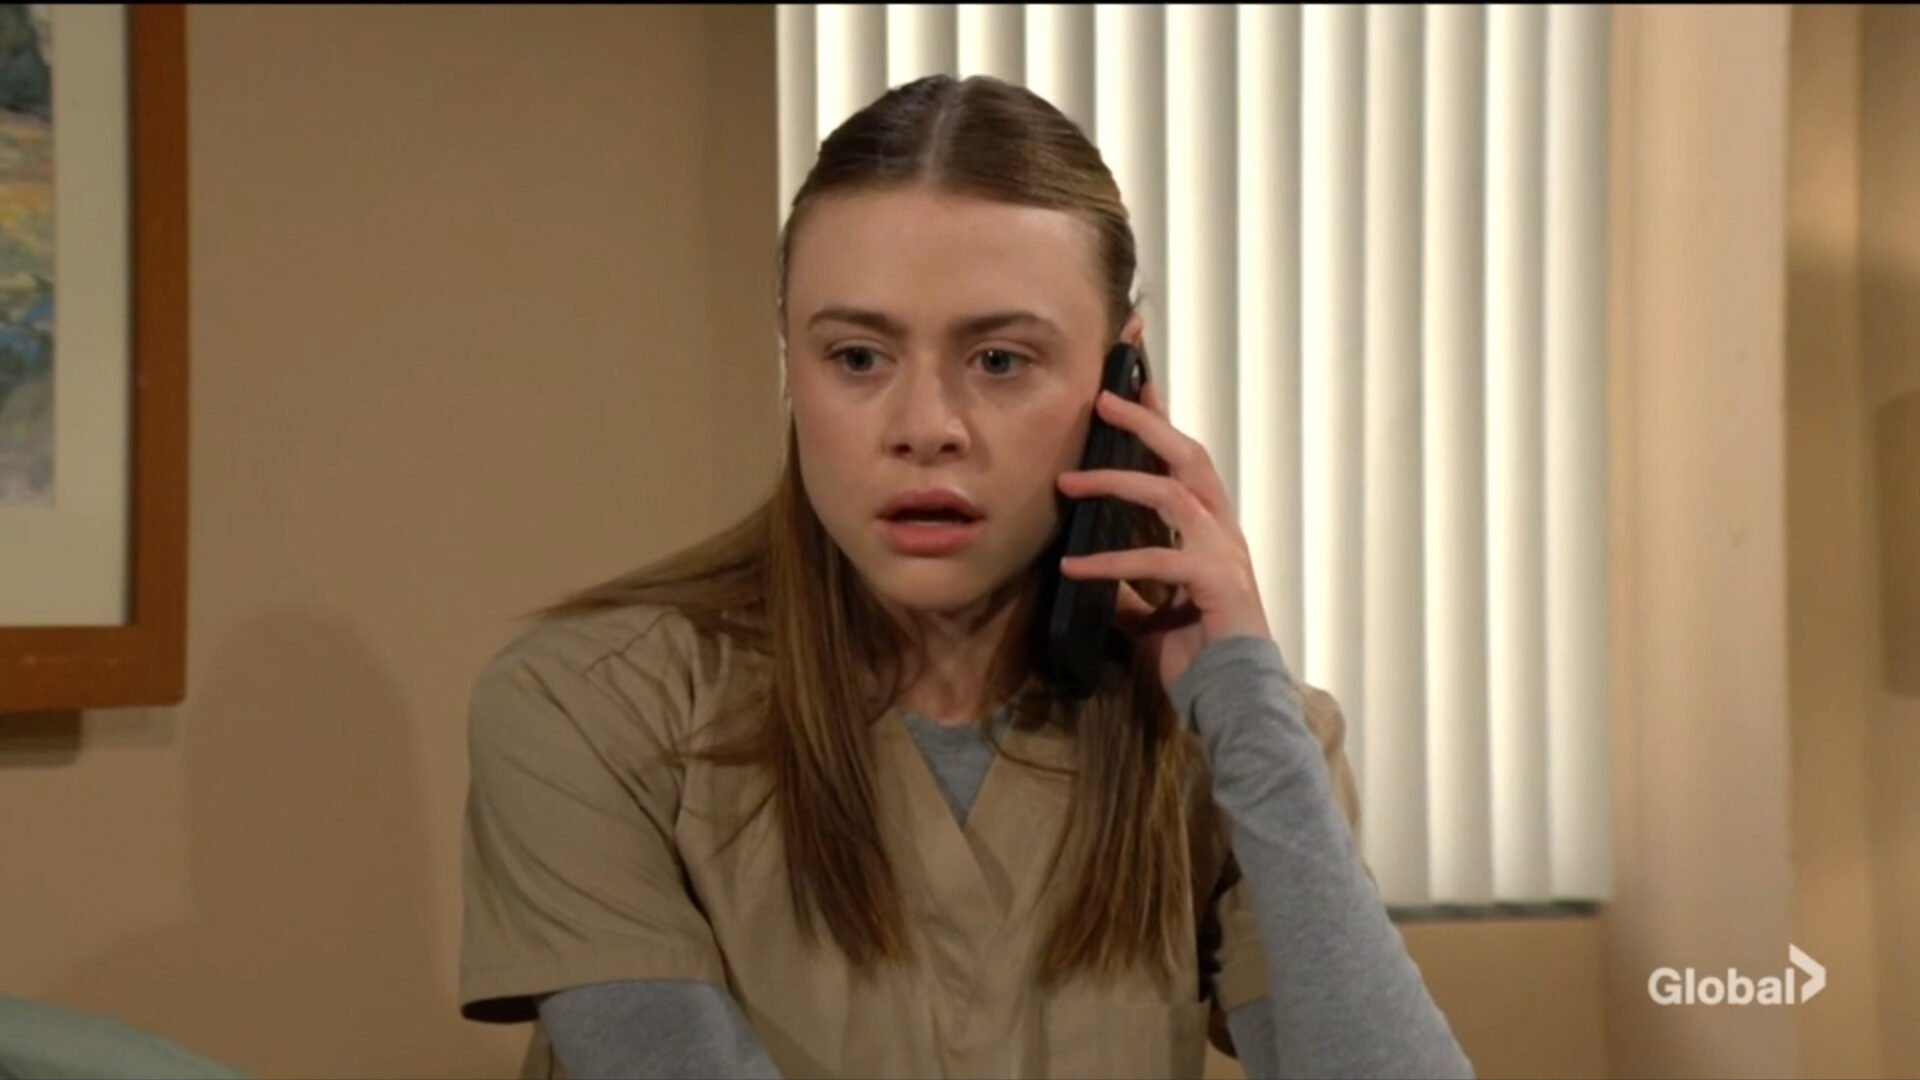 claire upset on call with jordan